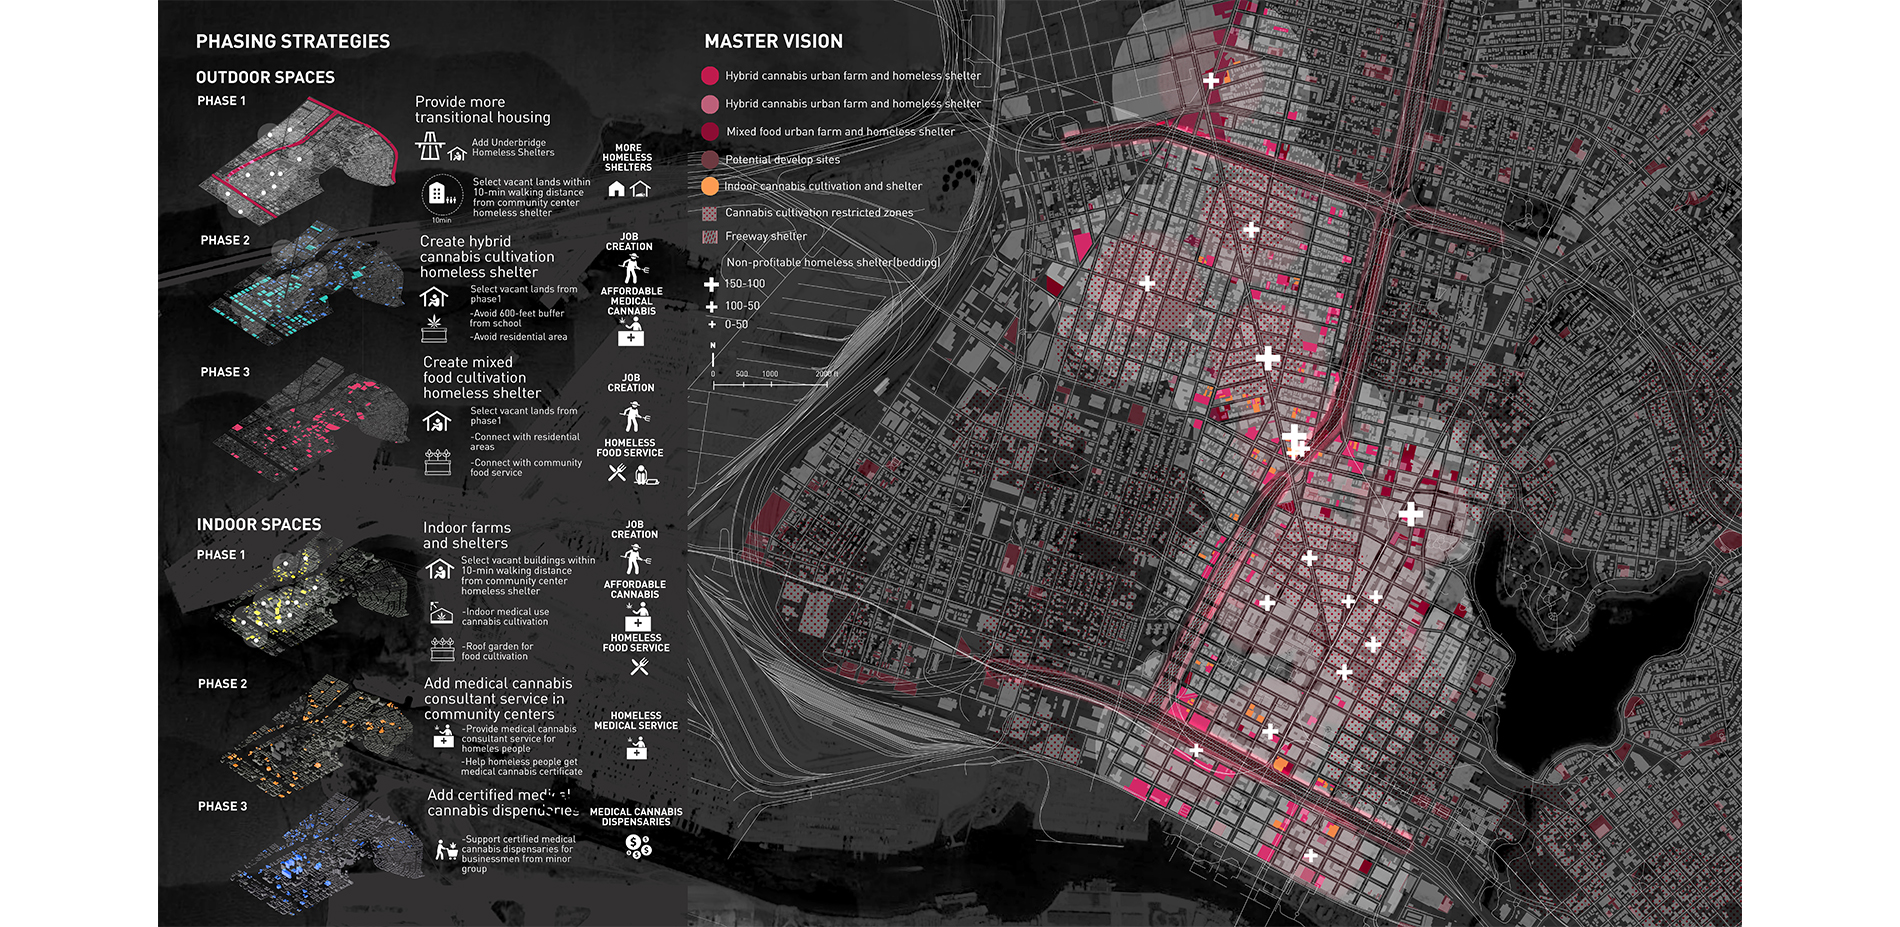 Master vision of hybrid urban farm and homeless shelters in Oakland downtown